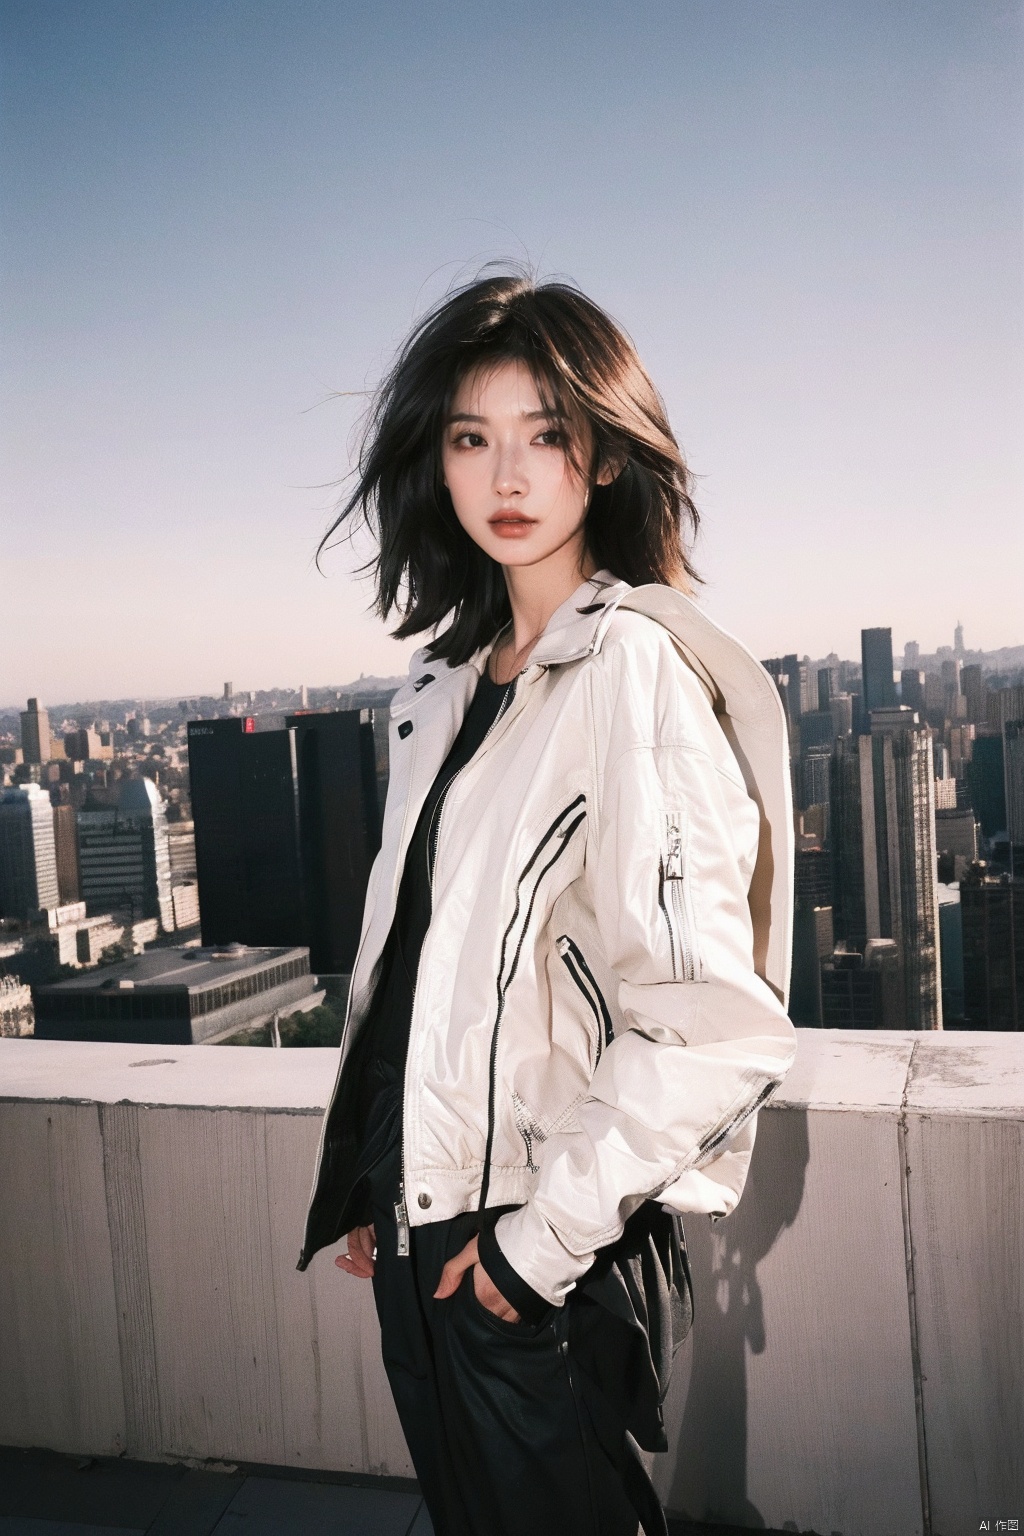 A modern, chic woman wearing a black leather moto jacket and ripped jeans stands confidently on the rooftop of a skyscraper, gazing out at the city skyline. Her short, tousled hair is swept back by the wind as she smiles subtly, embodying a sense of independence and strength. The shot is captured with a Sony A7R IV using a 24-70mm f/2.8 lens from a slightly elevated angle, maintaining sharp focus on her face and the sprawling city behind her. The photograph exudes a bold and empowering energy, reminiscent of Annie Leibovitz's portraits.